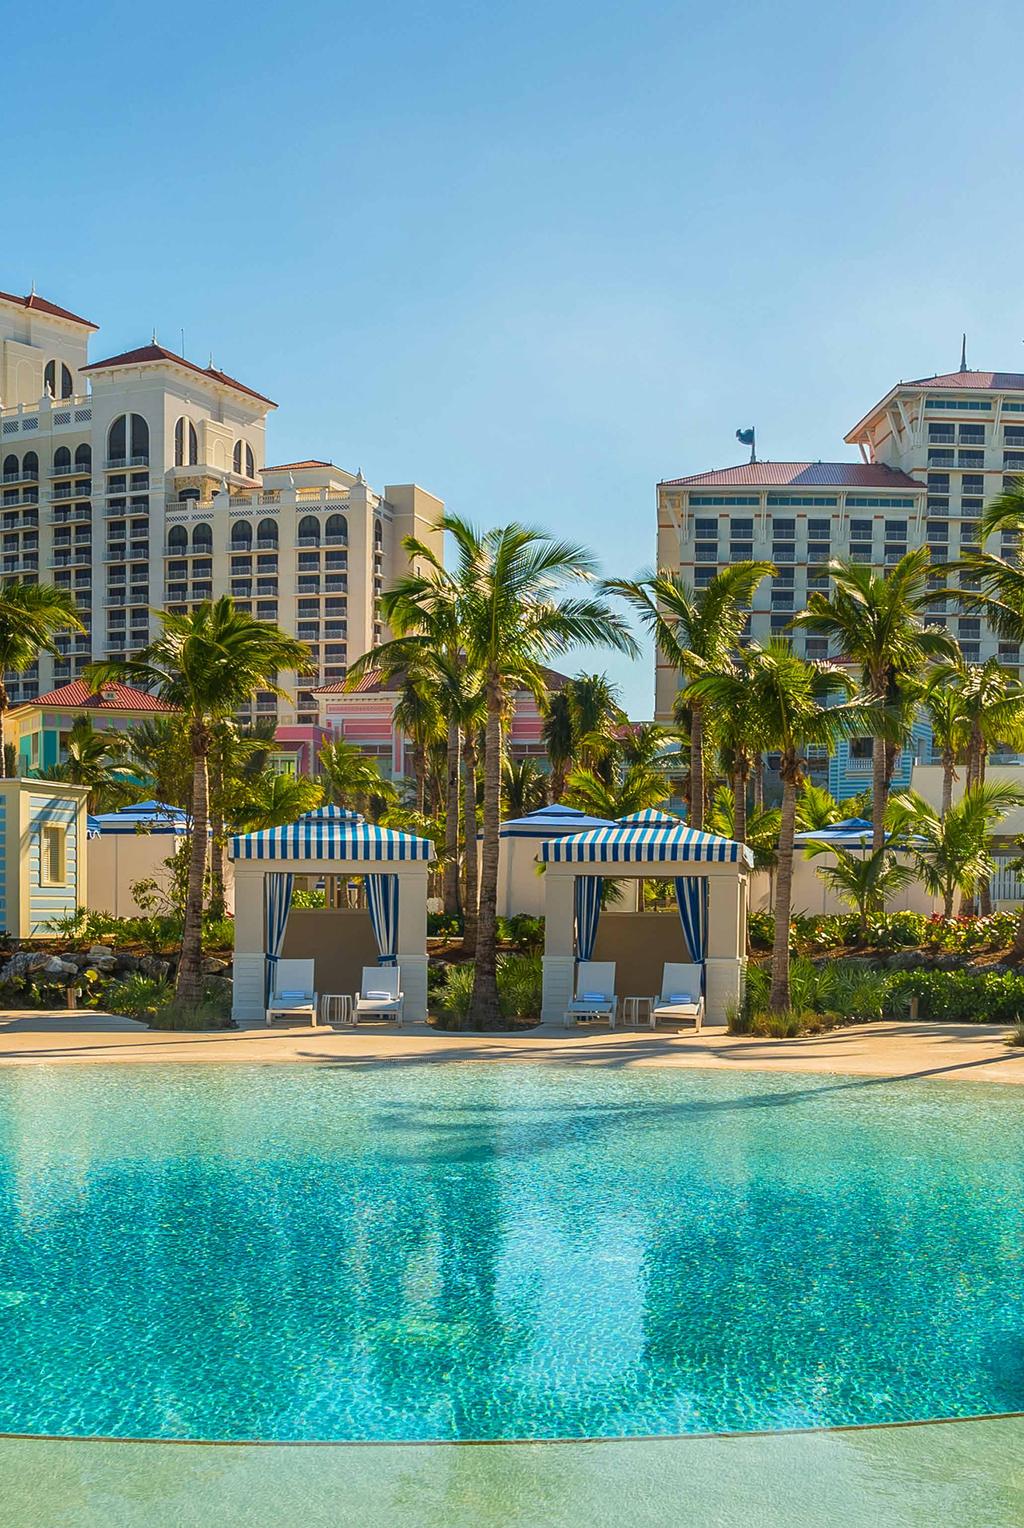 Grand Hyatt Baha Mar Location Conveniently located 10 minutes from Lynden Pindling International Airport and part of the much anticipated epic endeavor Baha Mar, our awe inspiring resort, Grand Hyatt